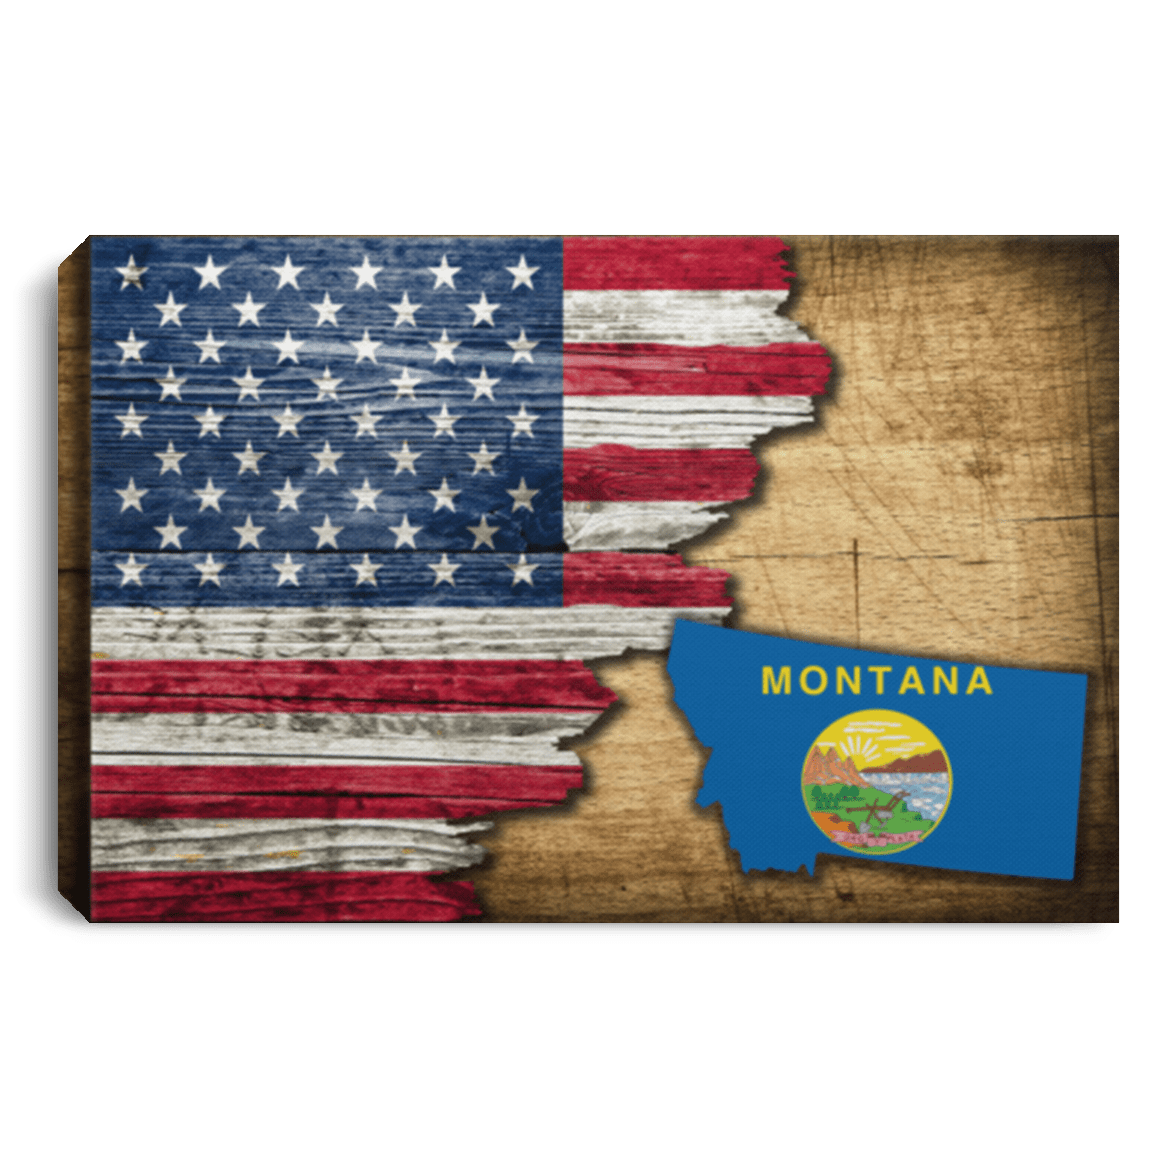 United States/Montana Flag Ripped Effect 12X8 Inches Landscape Canvas .75In Frame